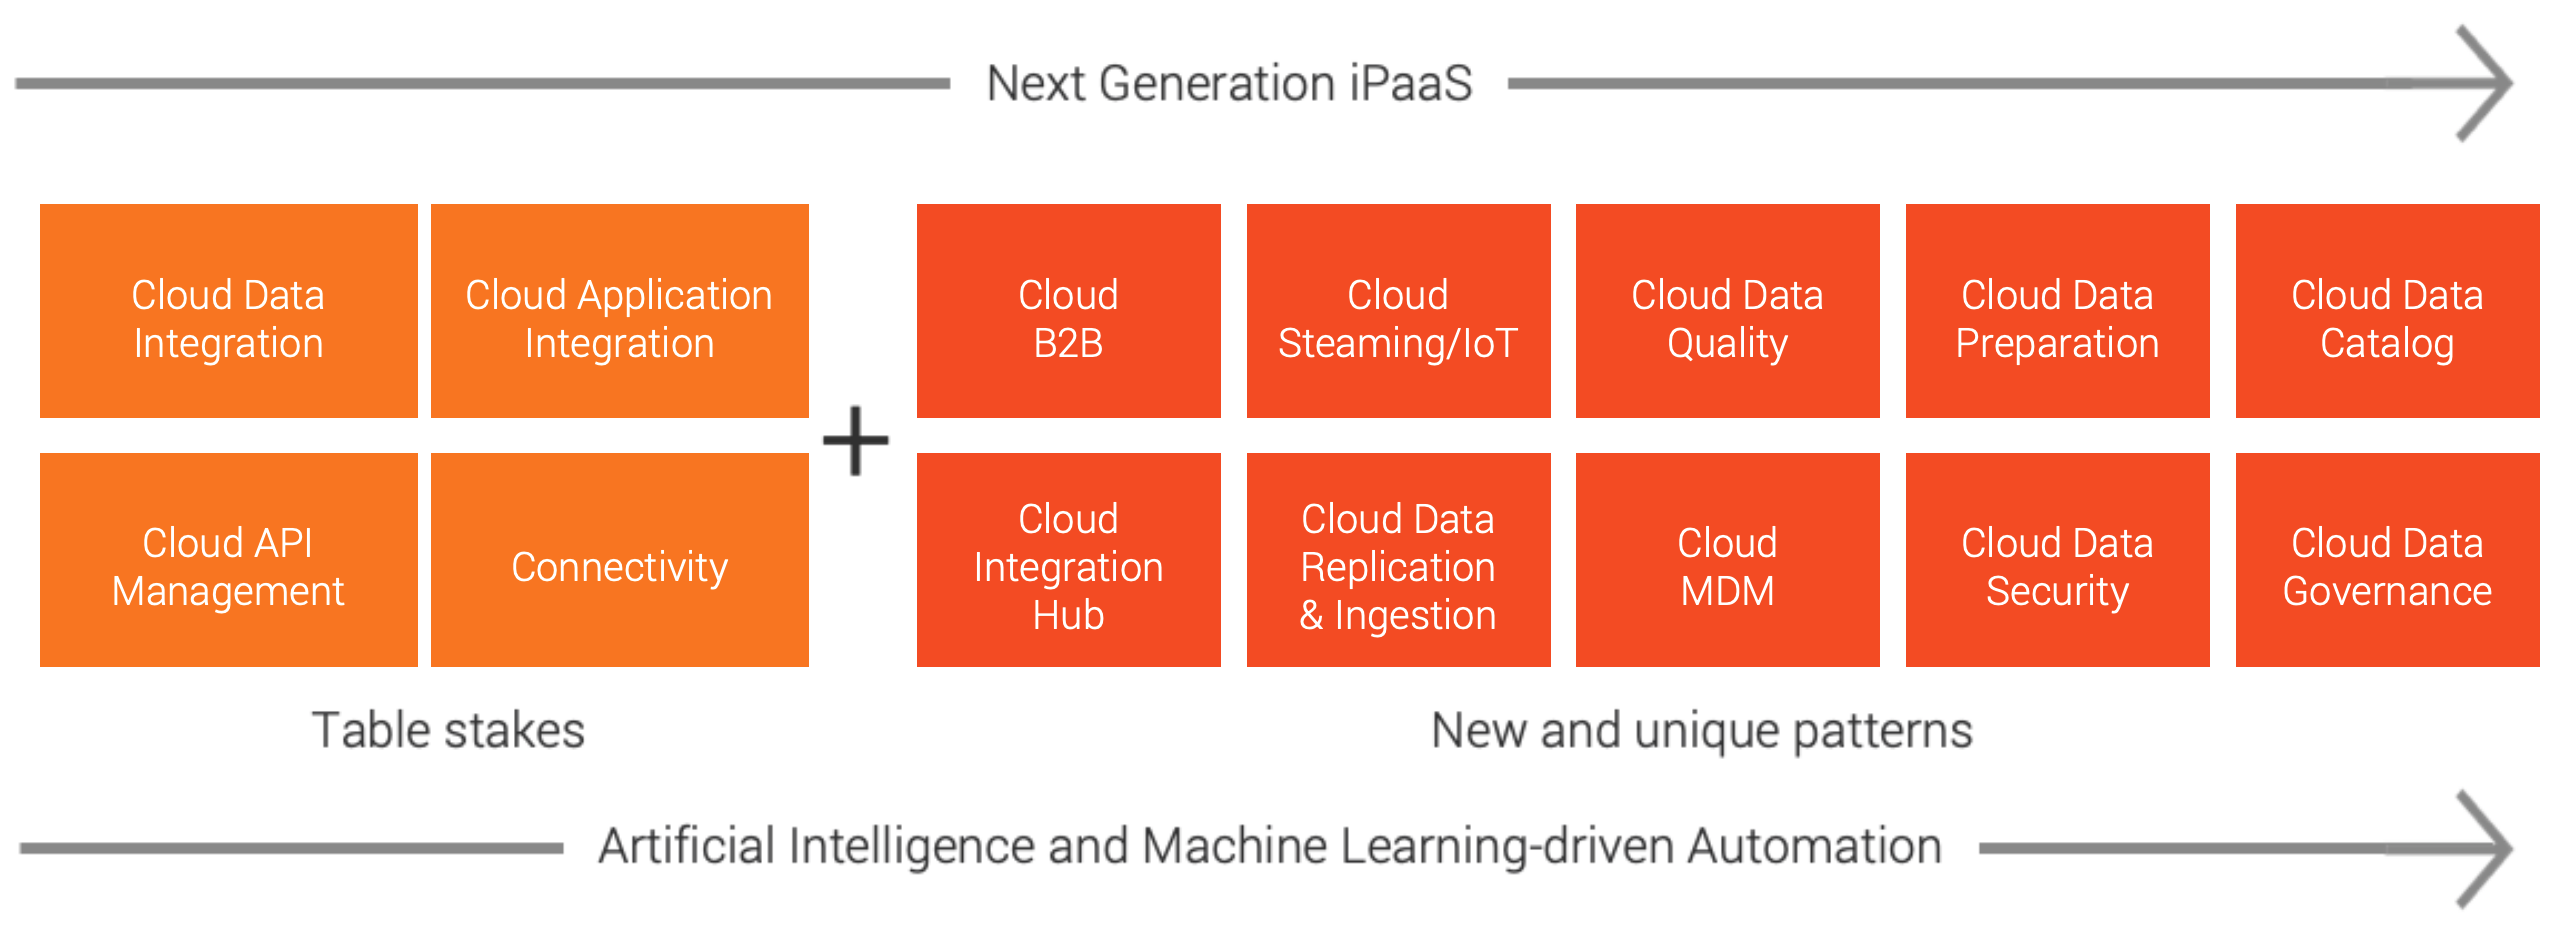 New and unique patterns with next-gen iPaaS